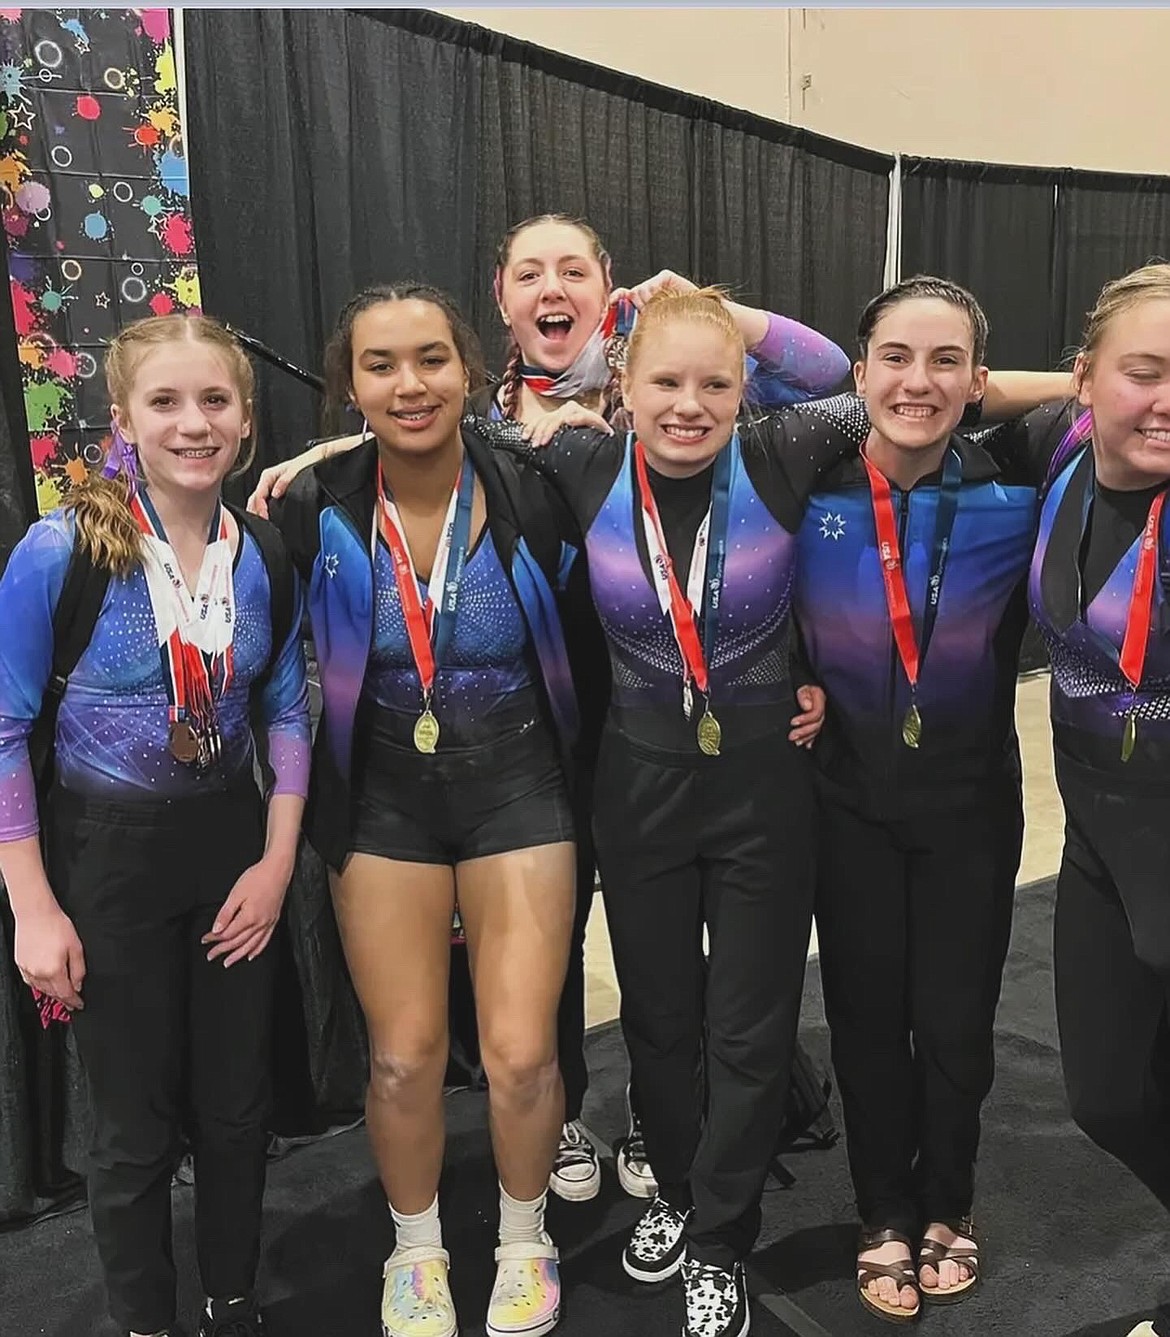 Courtesy photo
GEMS Athletic Center Platinum team Session 2 at the state Xcel gymnastics championships March 22-24 in Boise. From left are Macee Caudle, Shariece Vandever, Laina Busicchia, Izzy McCalin, Ariel Fahey and Riley Walton.